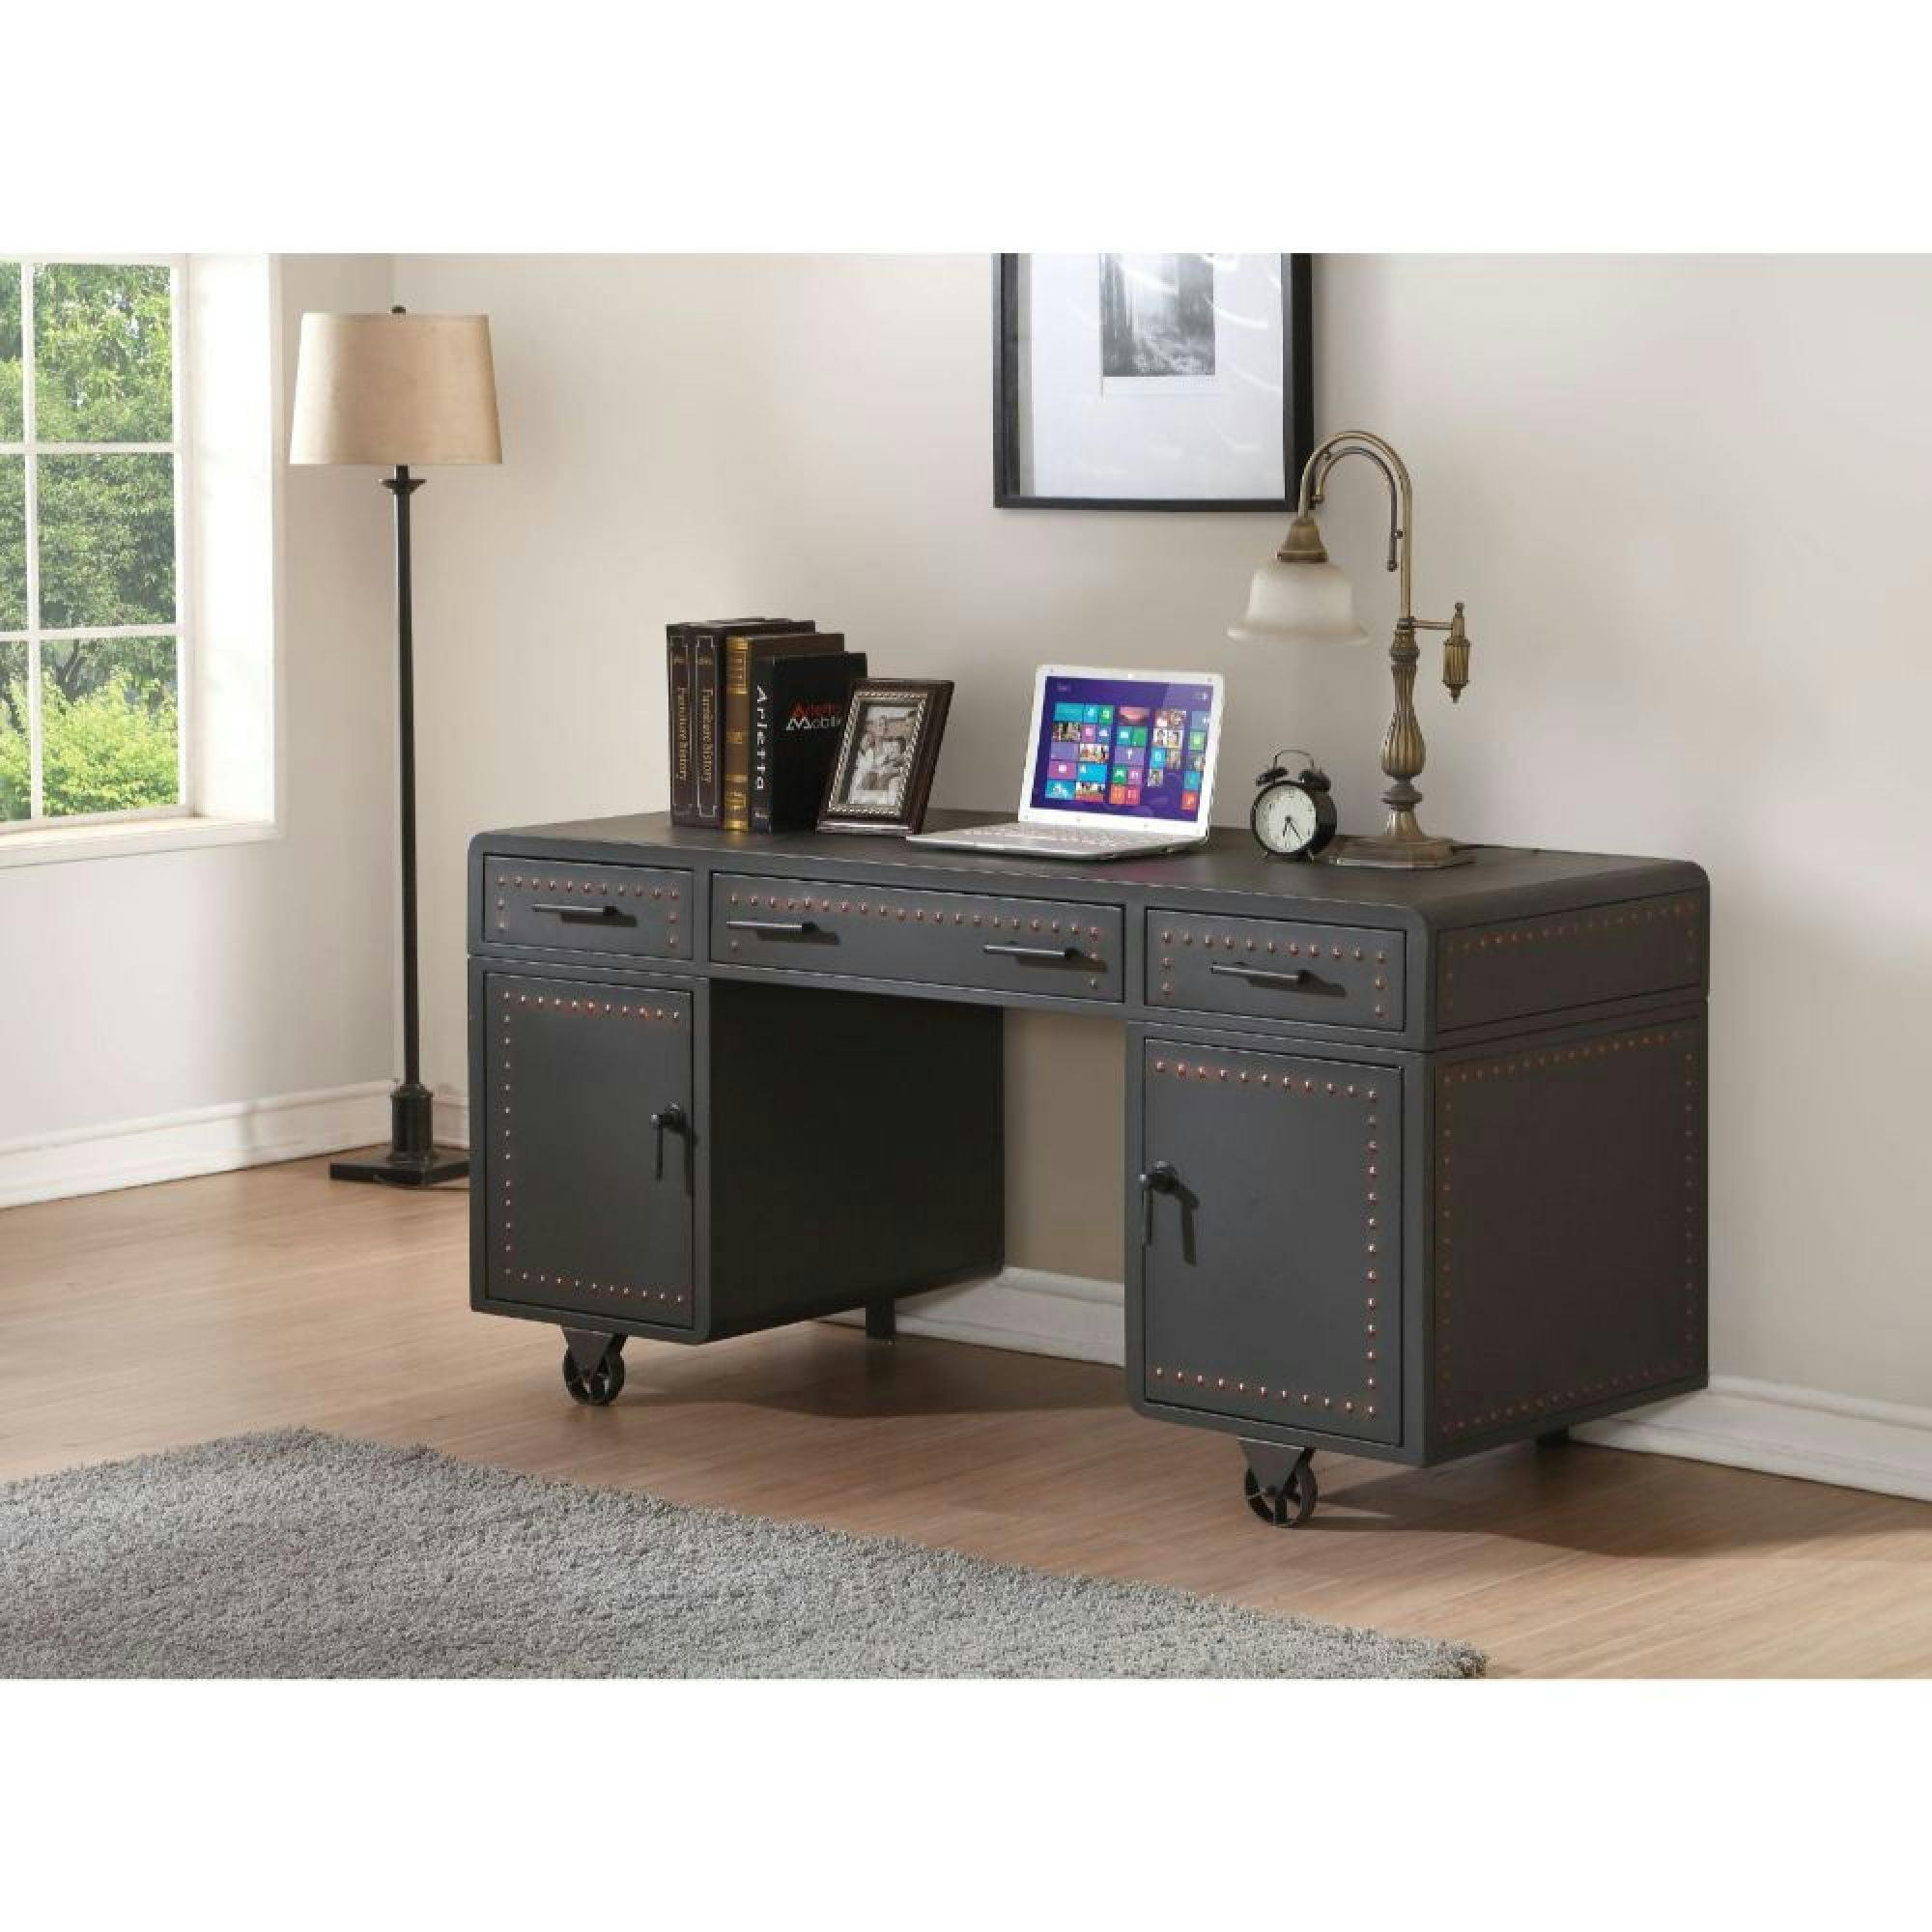 Actaki Executive Gray Wood Desk with Industrial Wheels and Drawers